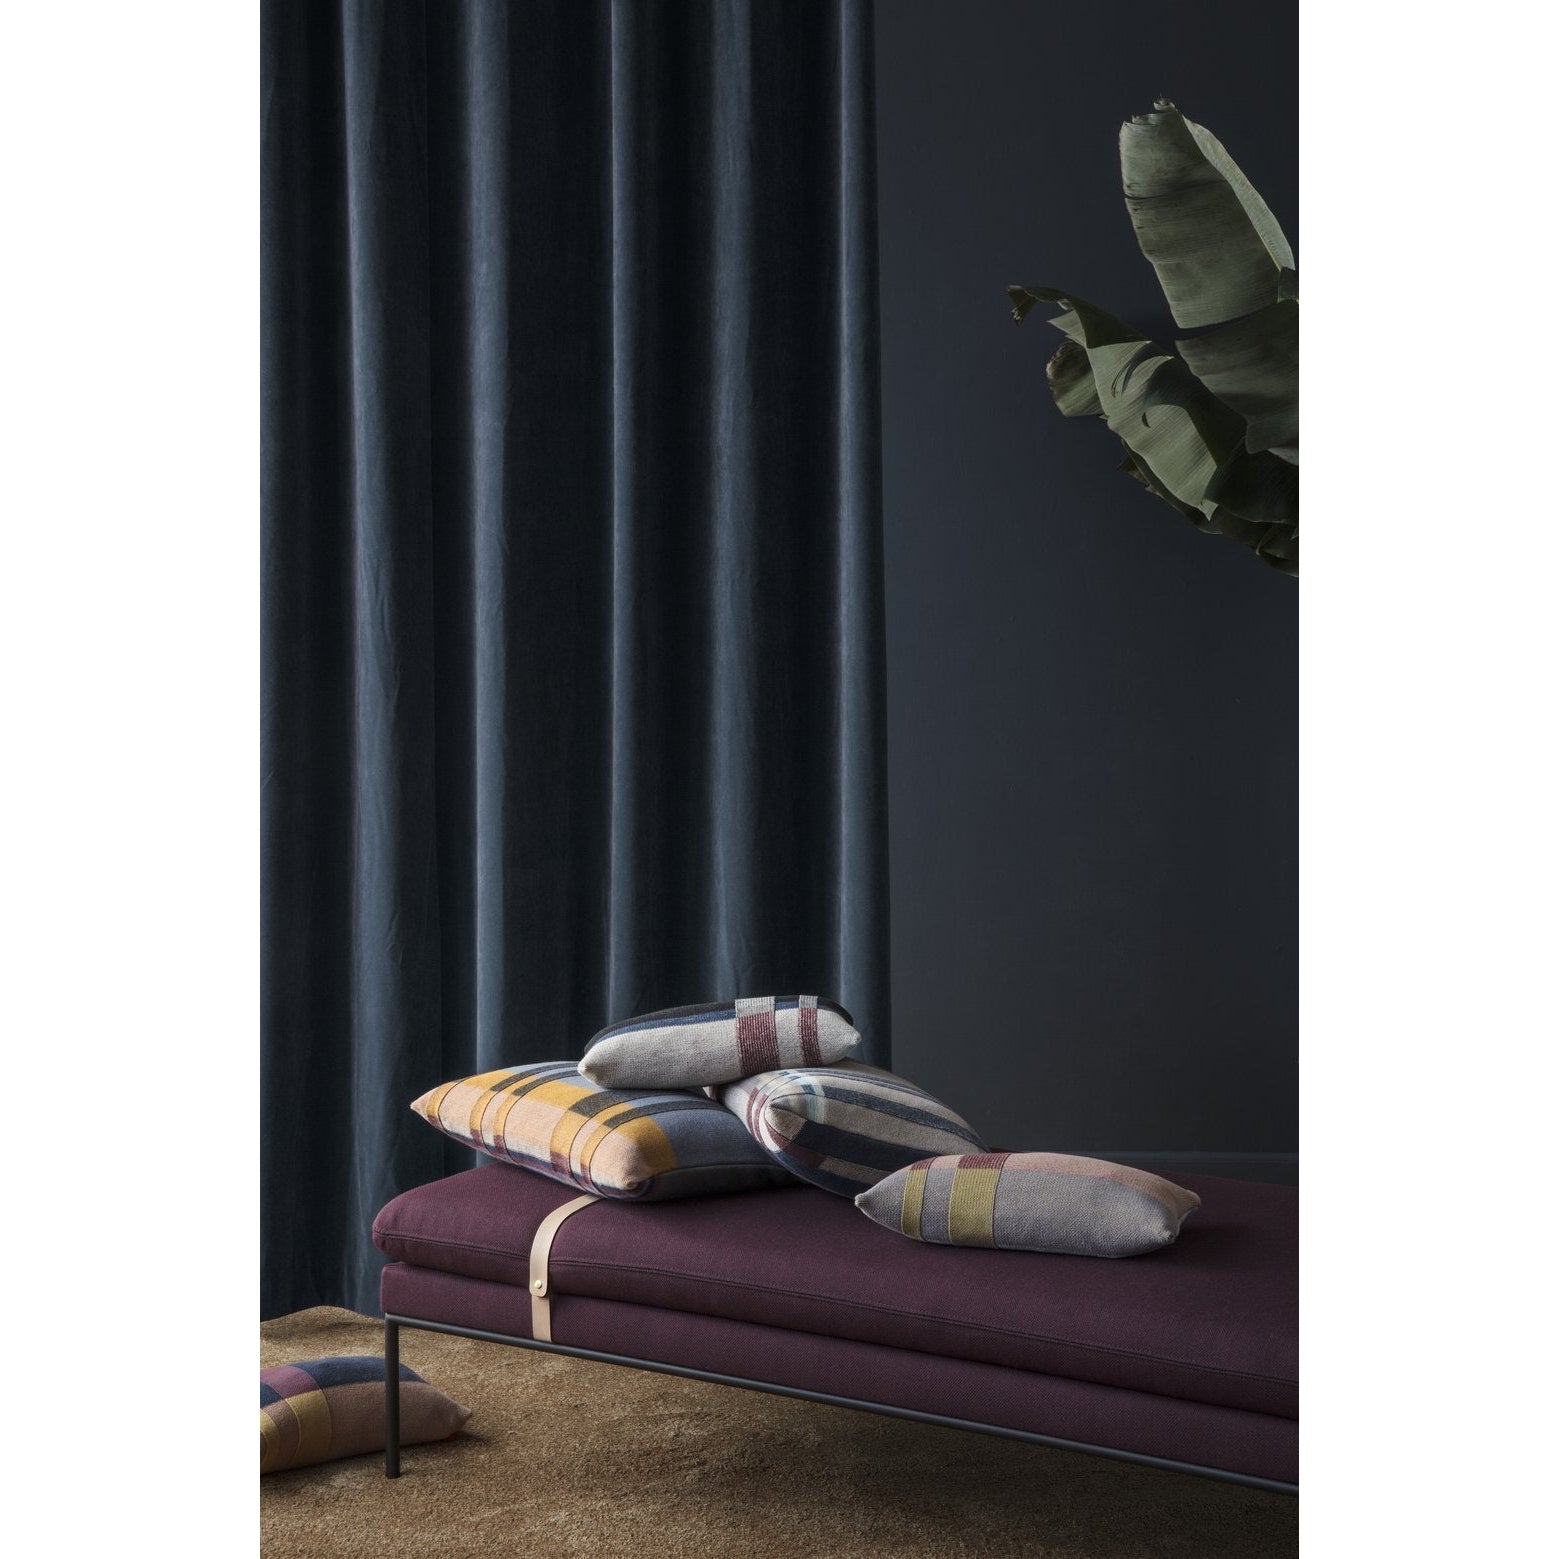 Ferm Living Turn Bed Bed Fiord, Solid Bordeaux